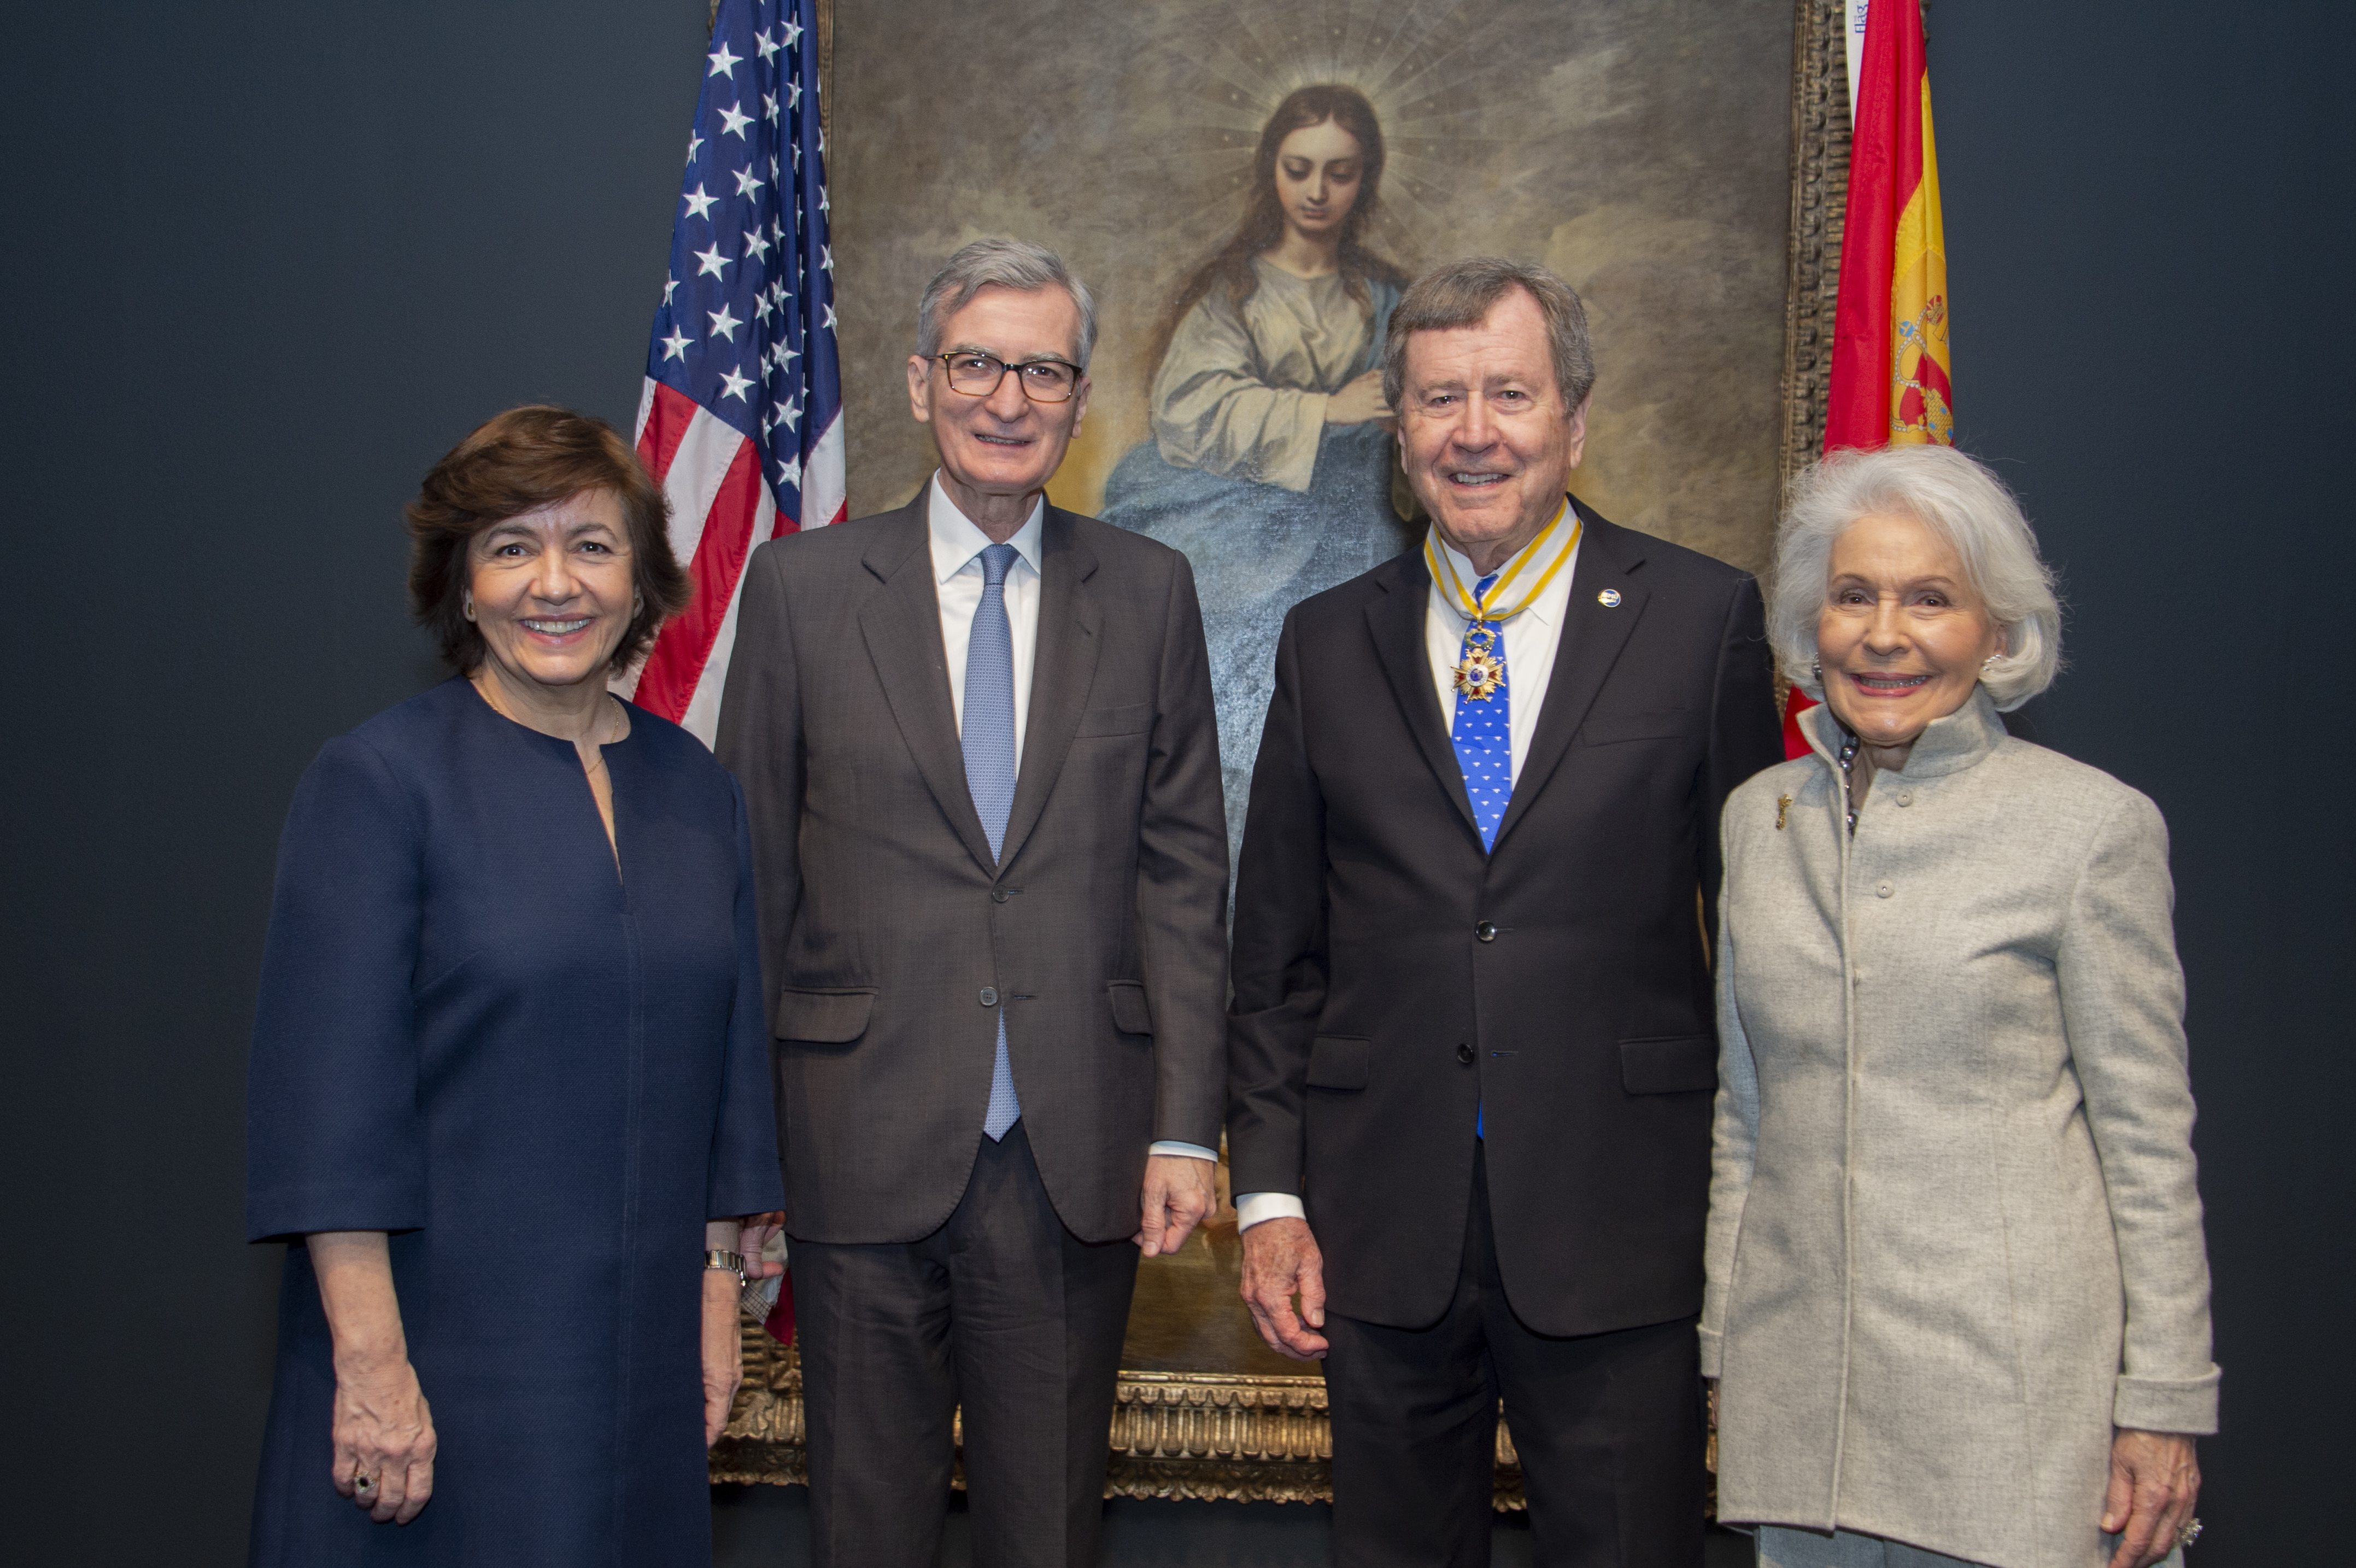 From left: Julia Olmo y Romero, consul general of Spain;  Santiago Cabanas, ambassador of Spain to the United States; SMU President R. Gerald Turner; Linda Pitts Custard, SMU Trustee Emerita and chair, Meadows Museum Advisory Council